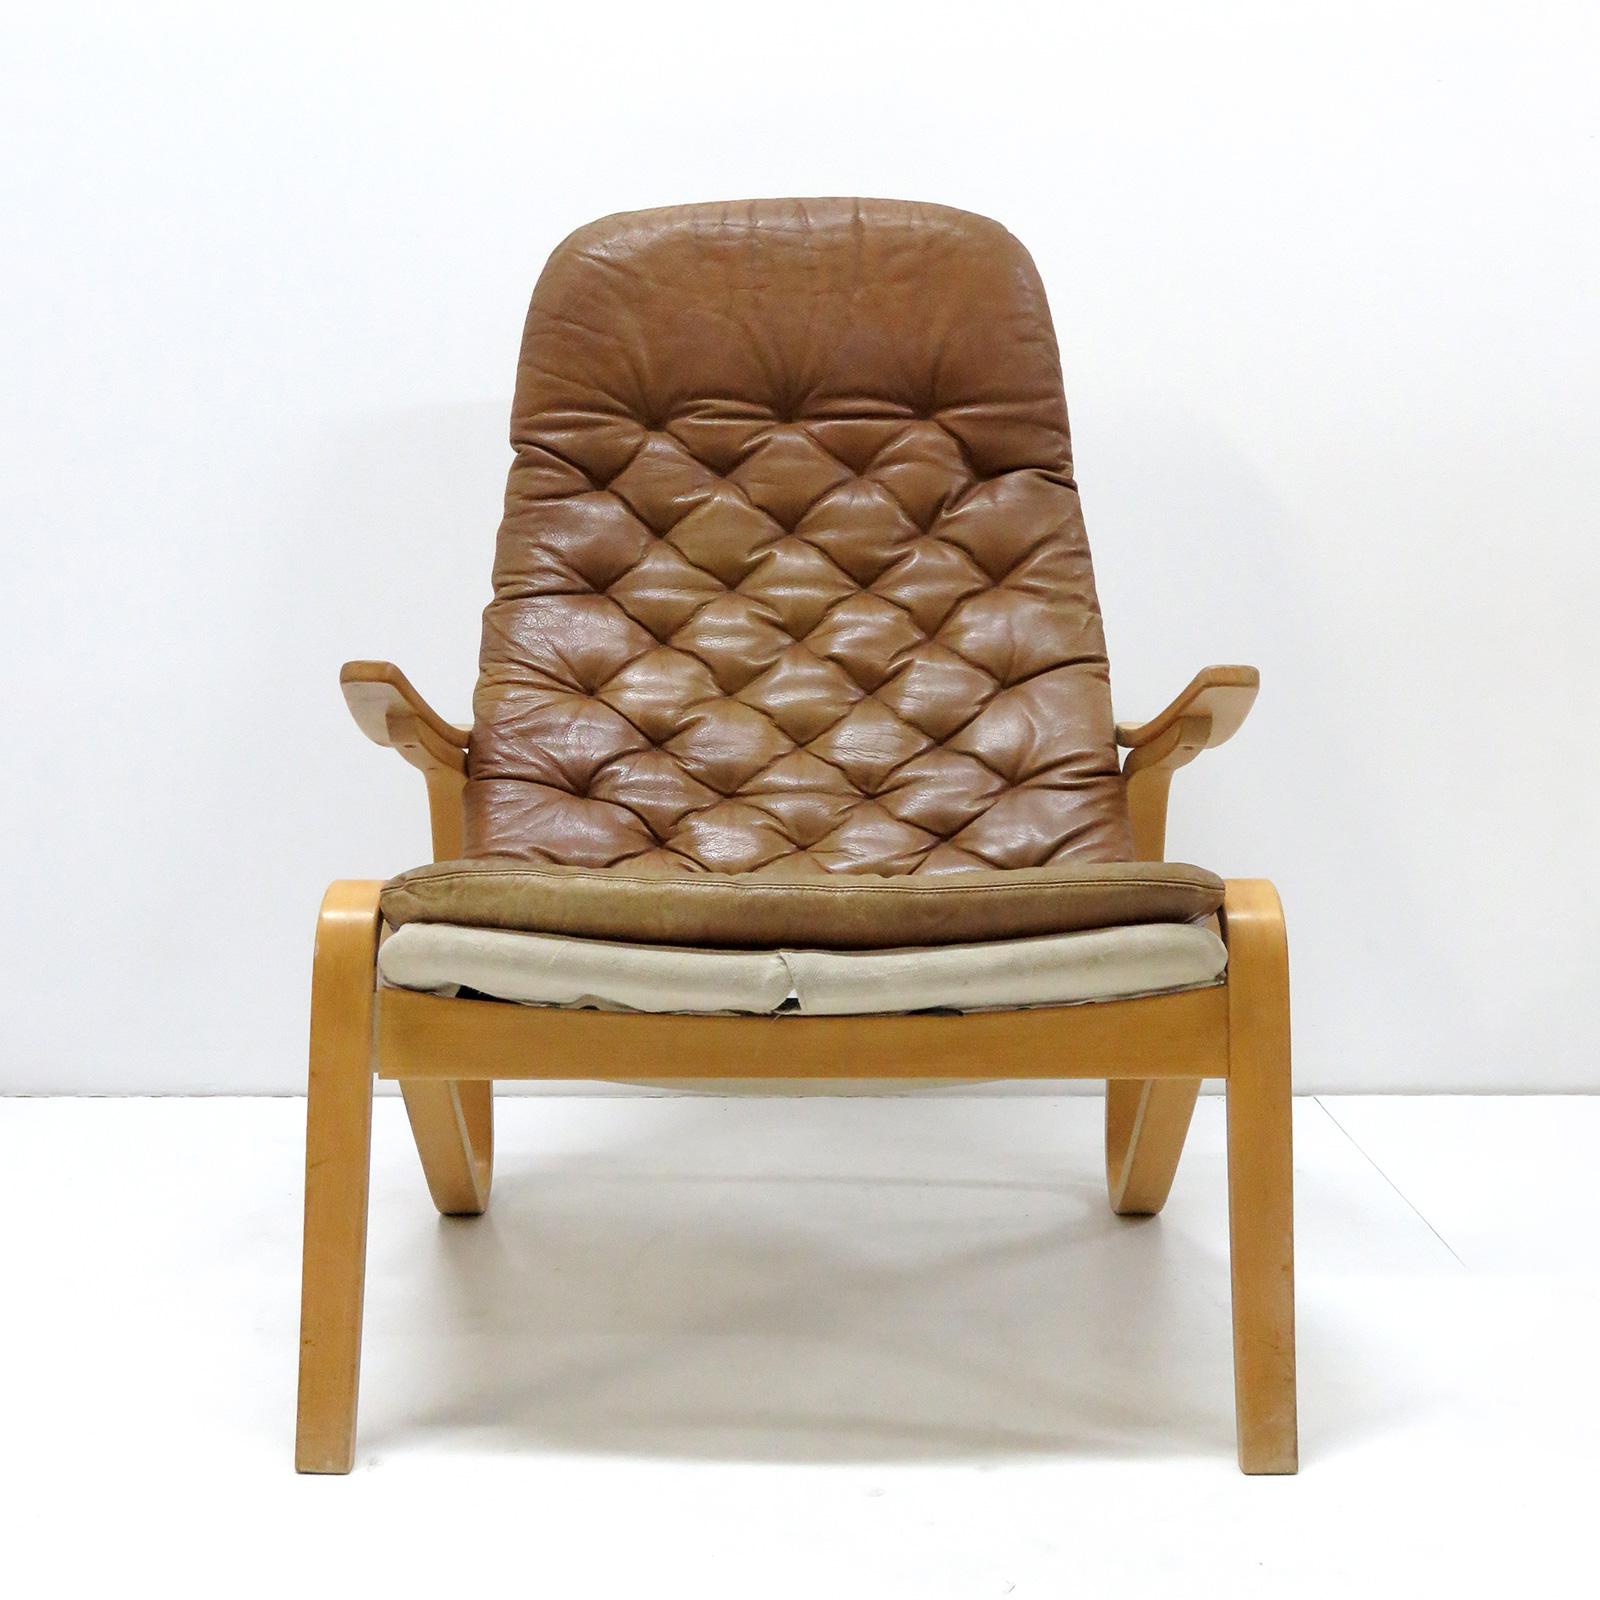 Wonderful leather lounge chair 'Metro' by Sam Larsson for DUX, Sweden, 1970, in cognac colored leather on a canvas covered birch bentwood frame, in good original condition with some patina and wear to the front of the leather seat due to age and